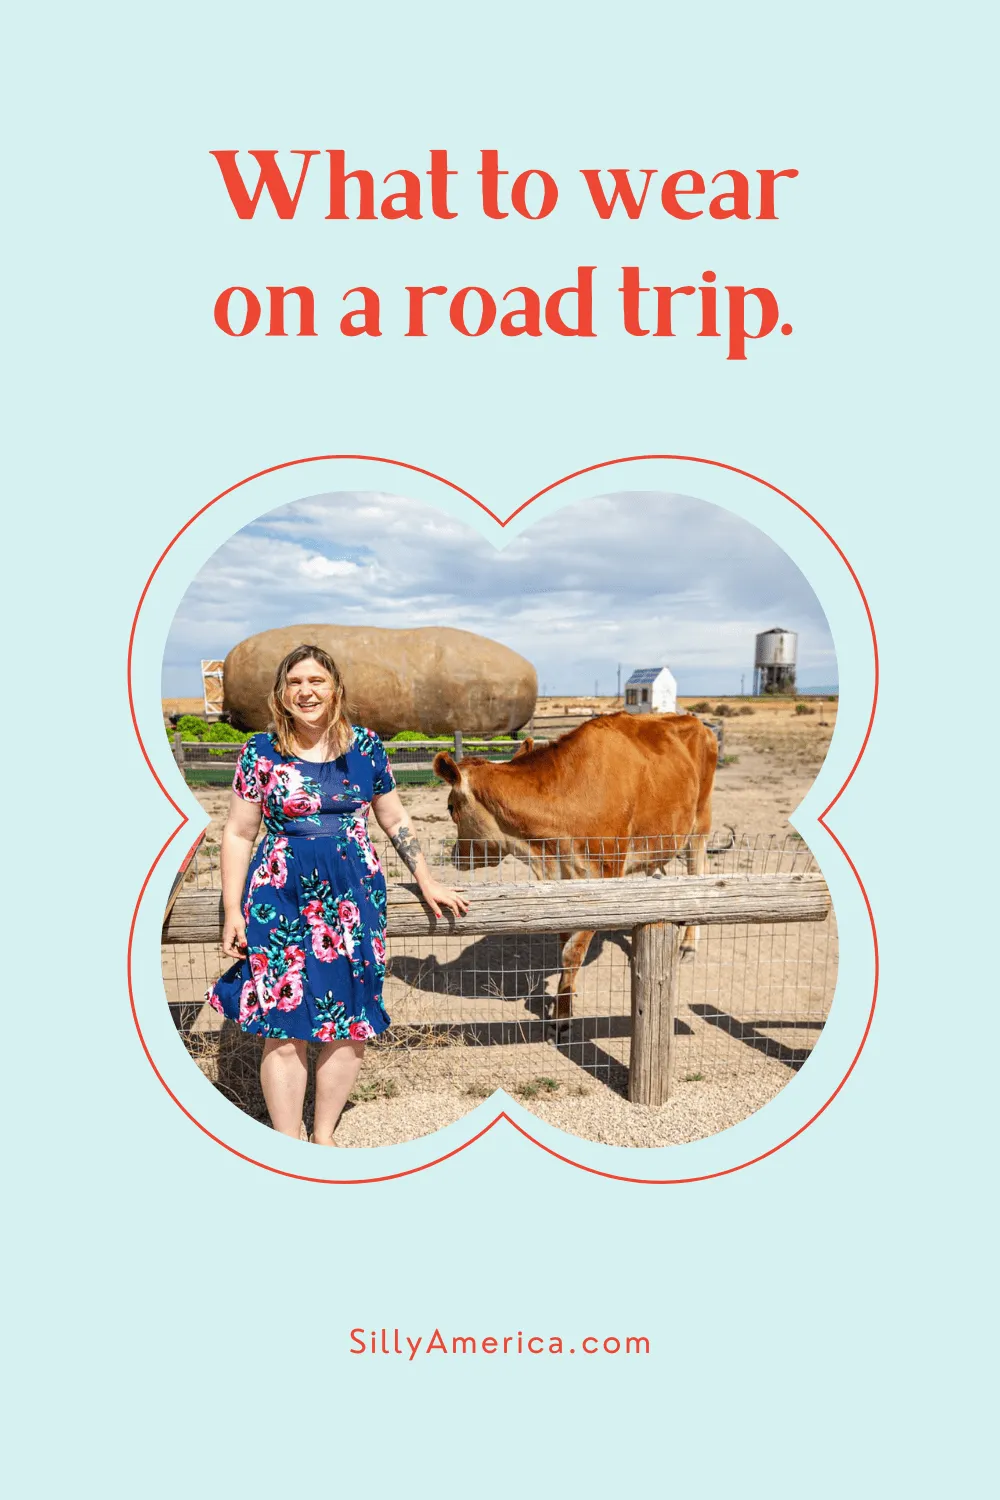 Are you gearing up for a long car trip, packing your bags, and left wondering what to wear on a road trip? Read on for all my tips for comfy road trip outfits and more of what to pack in your luggage. #RoadTripOutfitIdeas #RoadTripOutfit #RoadTripAesthetic #WhatToWearOnARoadTrip #RoadTripPacking #RoadTripPackingCar #RoadTripPackingList #RoadTripPackingClothes #RoadTripPackingFOrAdults #RoadTripPackingTips #RoadTripPackingEssentials #RoadTripPackingIdeas #LongRoadTripPacking